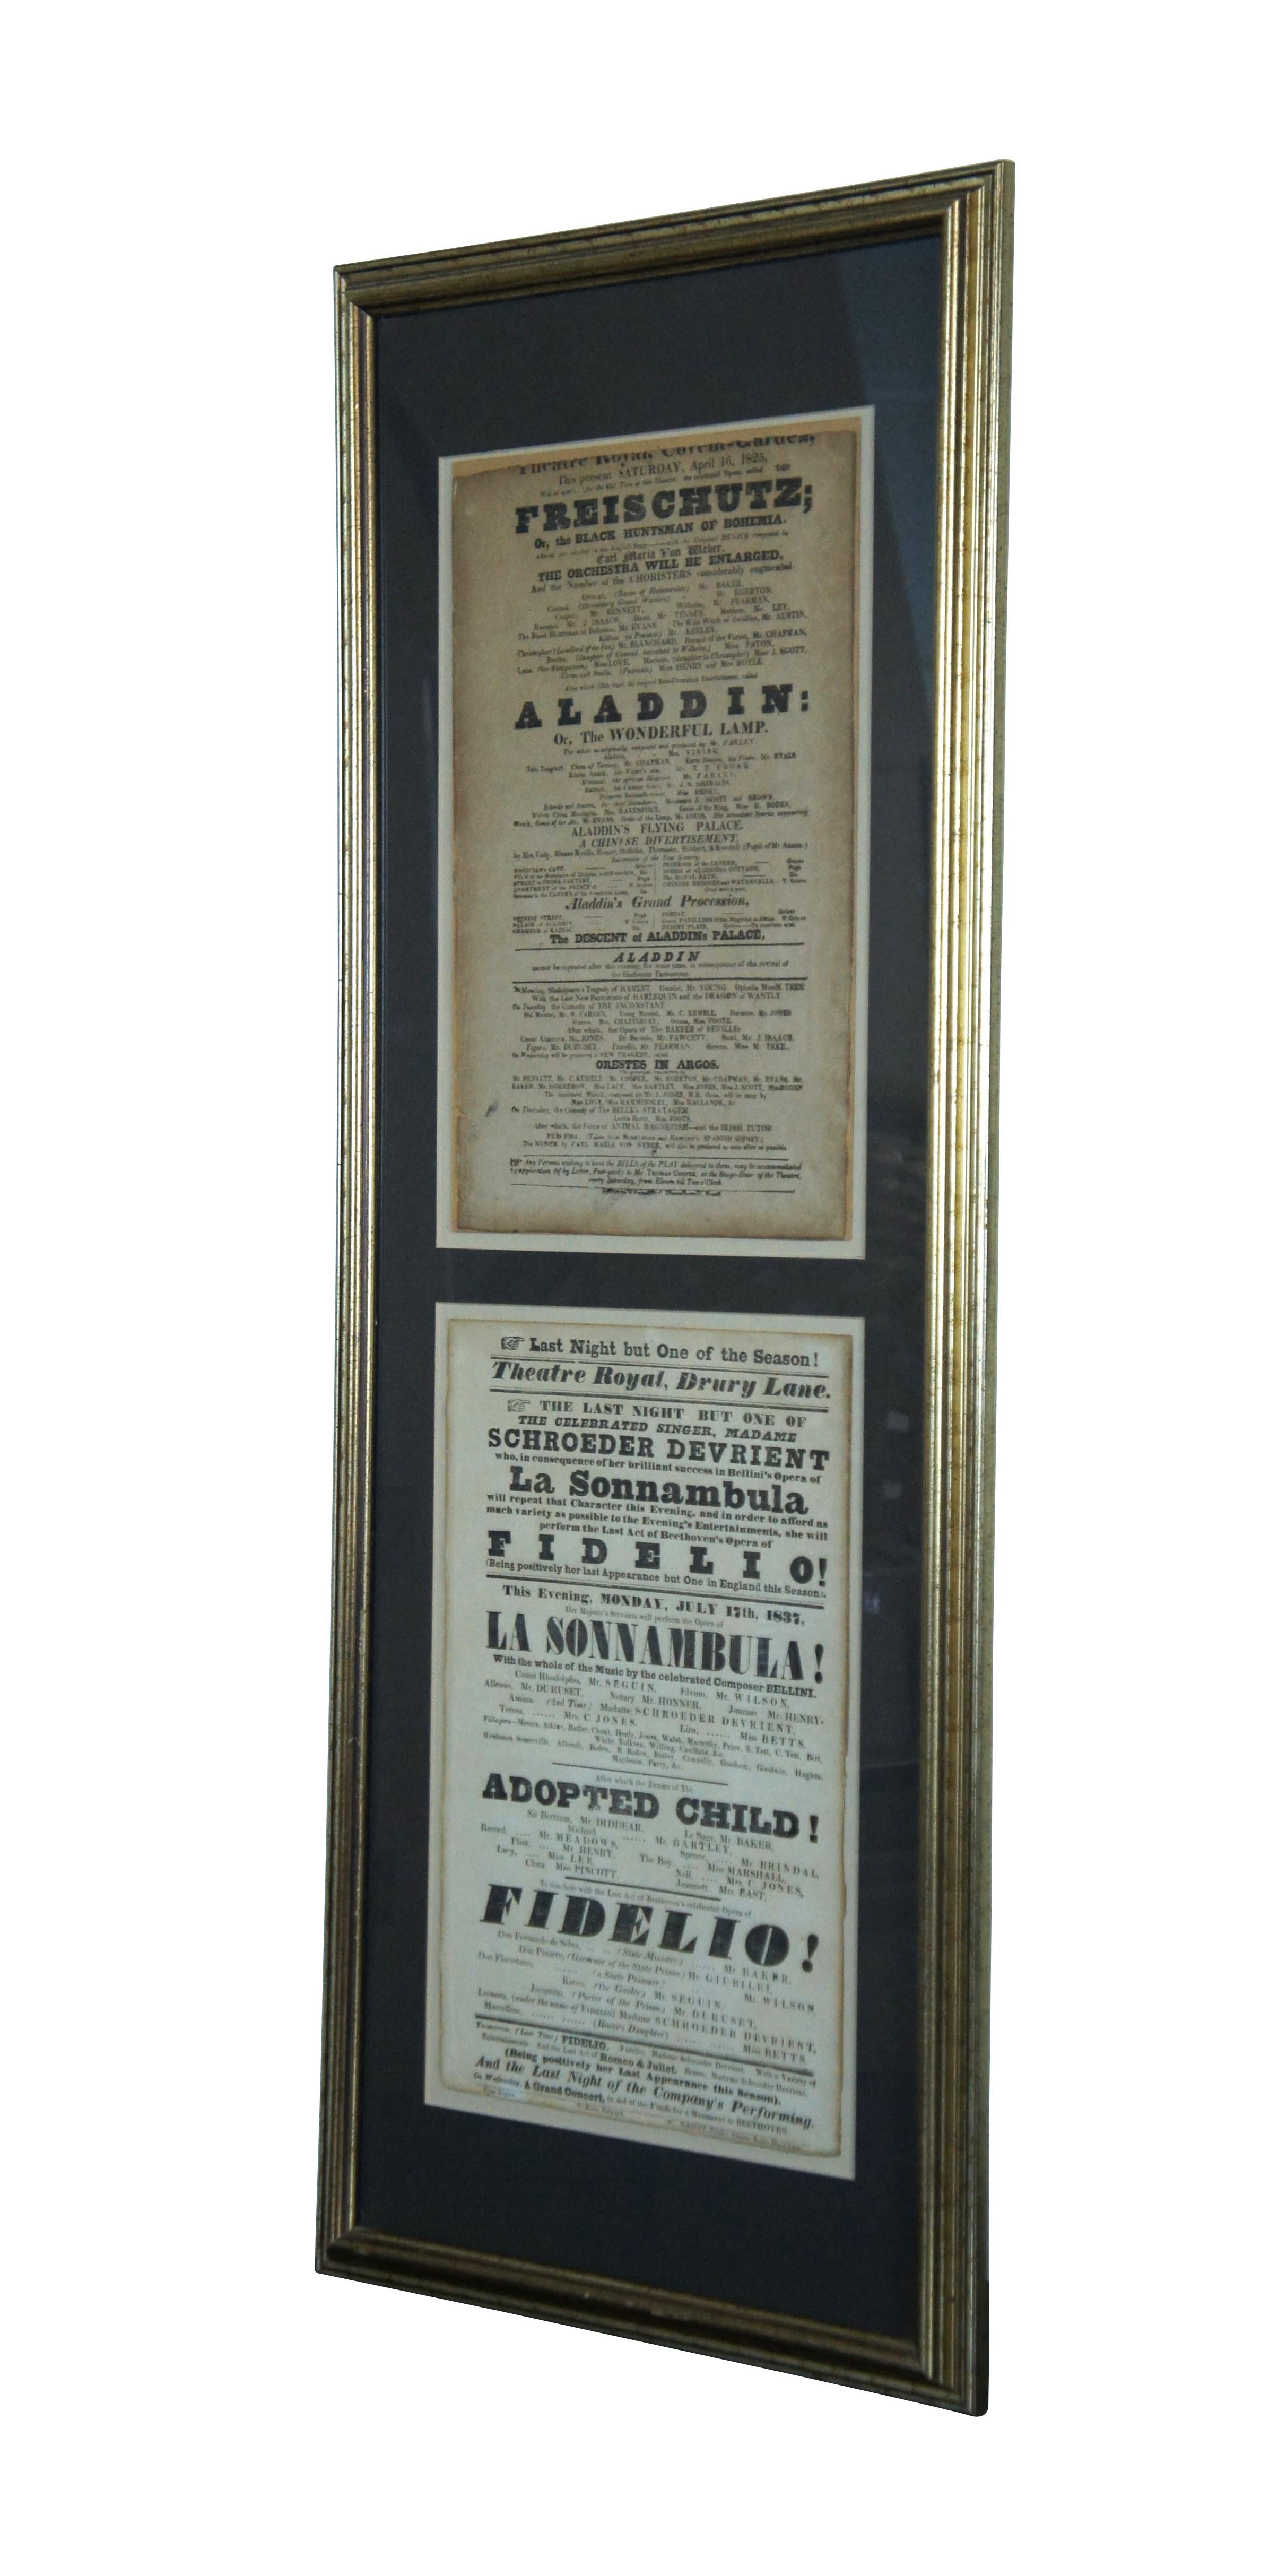 Pair of neat early 19th century theatre advertising fliers, framed in diptych. One for the Theatre Royal, Covent Garden, Saturday April 16, 1825. And the other for the Theatre Royal, Drury Lane, Monday July 17th, 1837. Giltwood frame with raised